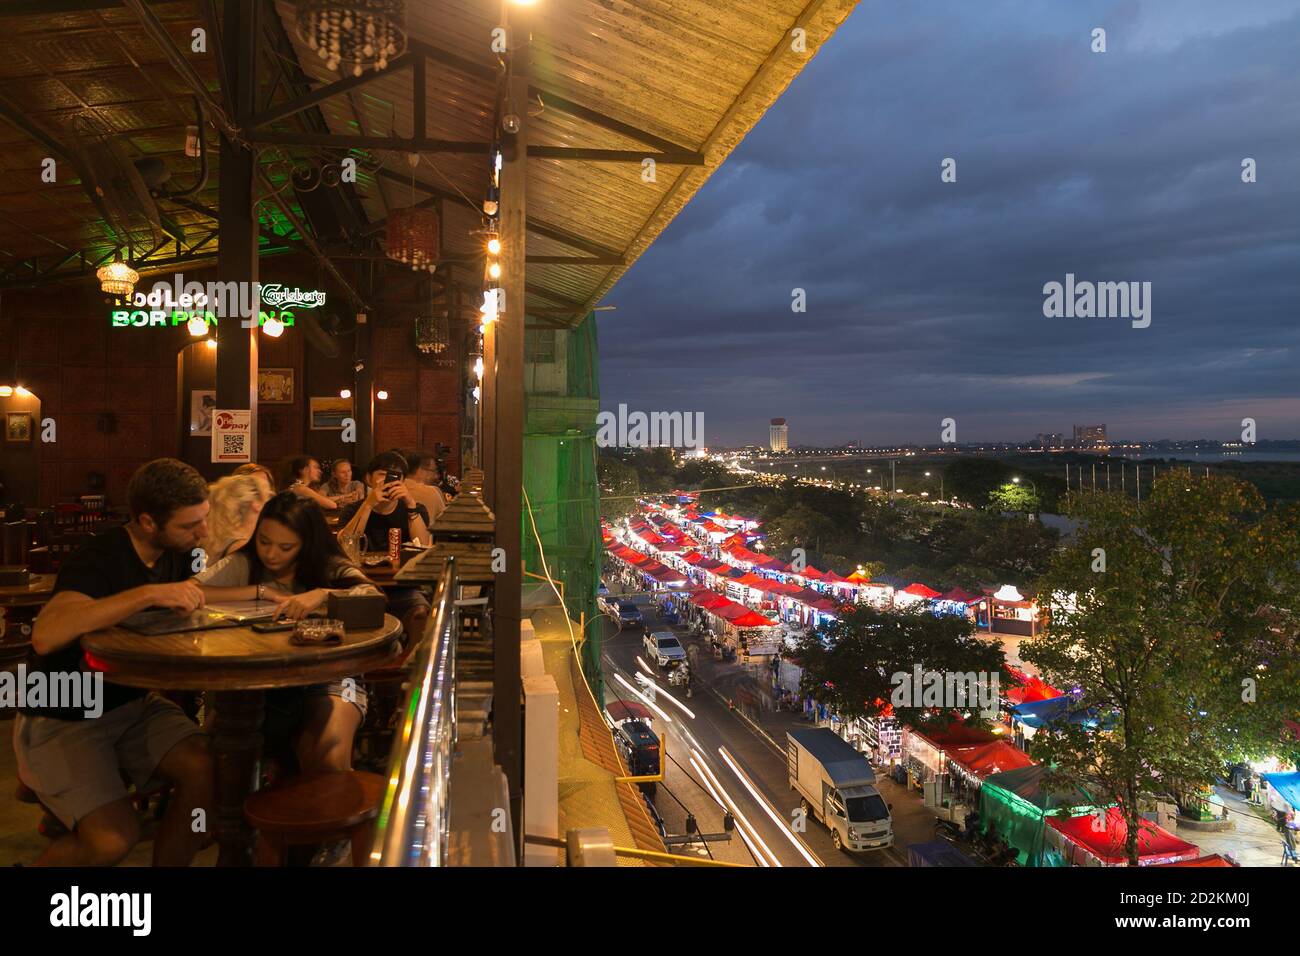 Vientiane. 29th Oct, 2019. Photo taken on Oct. 29, 2019 shows a night market along the Mekong River in Vientiane, Laos. Laos is the only landlocked country in Southeast Asia. In the central part of the country, the capital Vientiane is located on the alluvial plain on the Mekong River, suitable for fishing and plantation. The Lan Xang Kingdom, the first unified multi-ethnic nation in the history of Laos, moved its capital to Vientiane in the mid-16th century, and Vientiane gradually prospered. Credit: Kaikeo Saiyasane/Xinhua/Alamy Live News Stock Photo